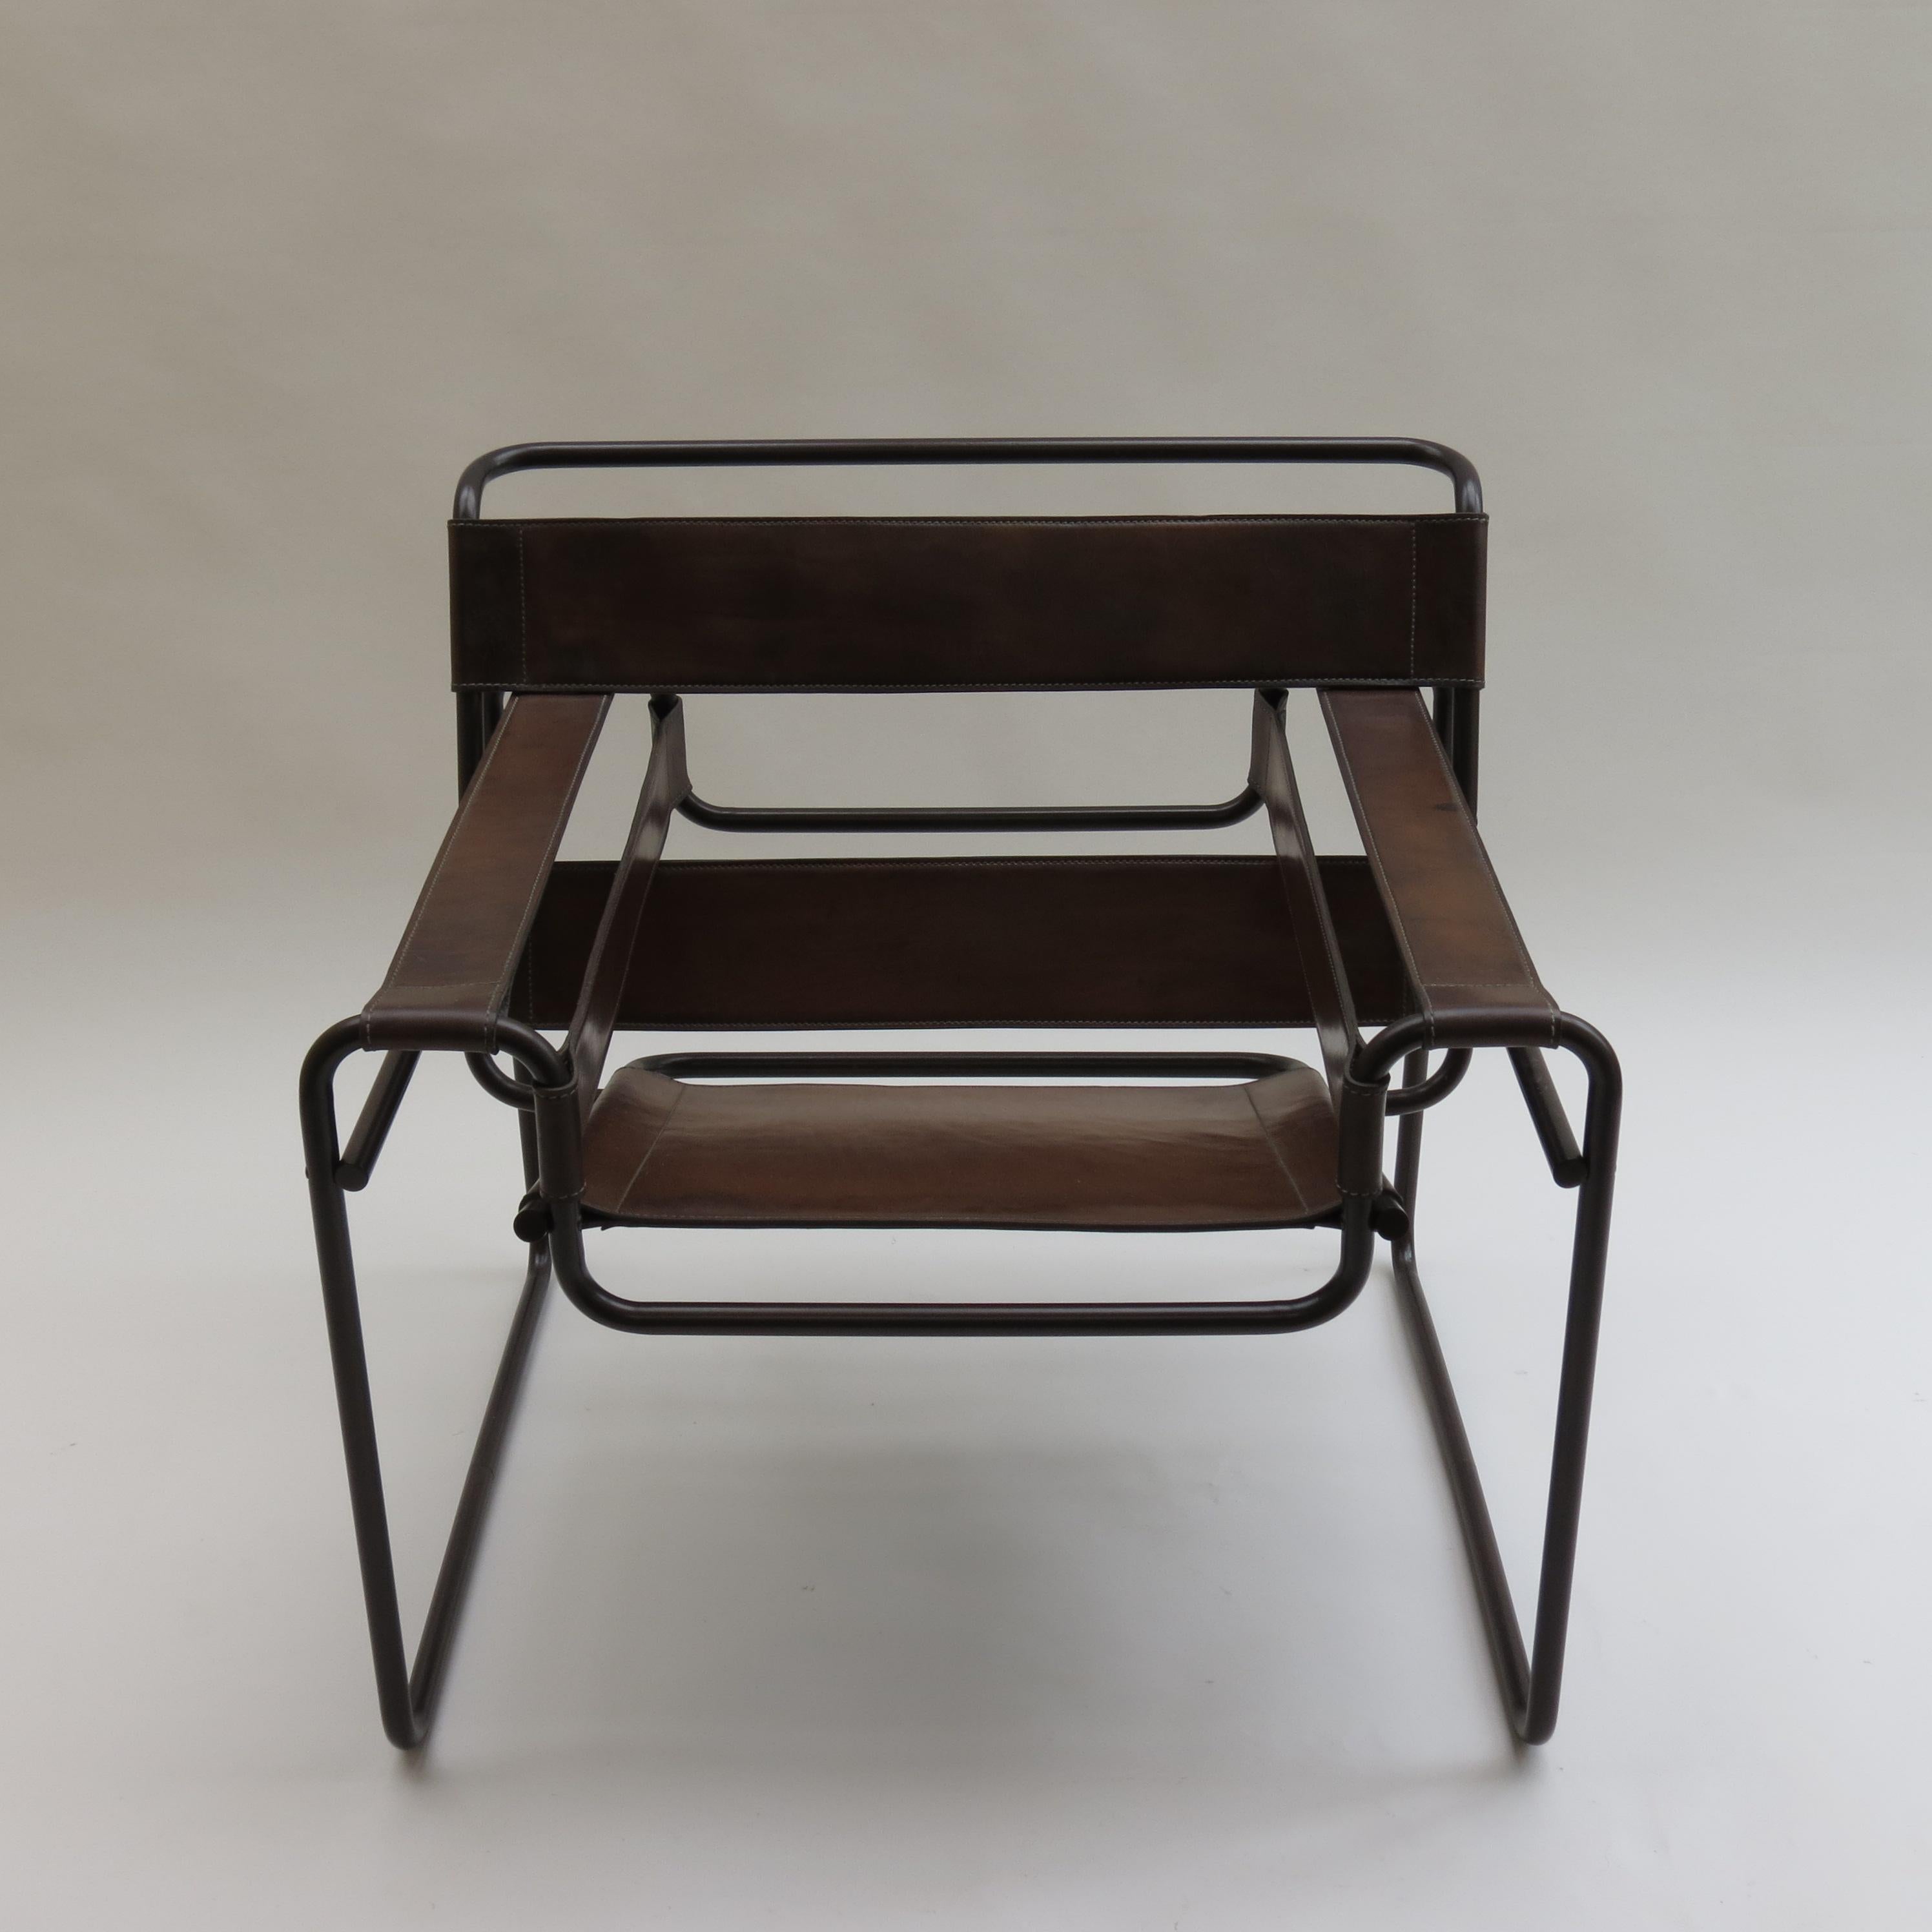 Wonderful Wassily armchair, designed by Marcel Breuer in 1925. This chair dates from the 1970s and the quality of the chair and especially the leather would suggest it was probably manufactured by Fasem.
Very good quality production with bronze